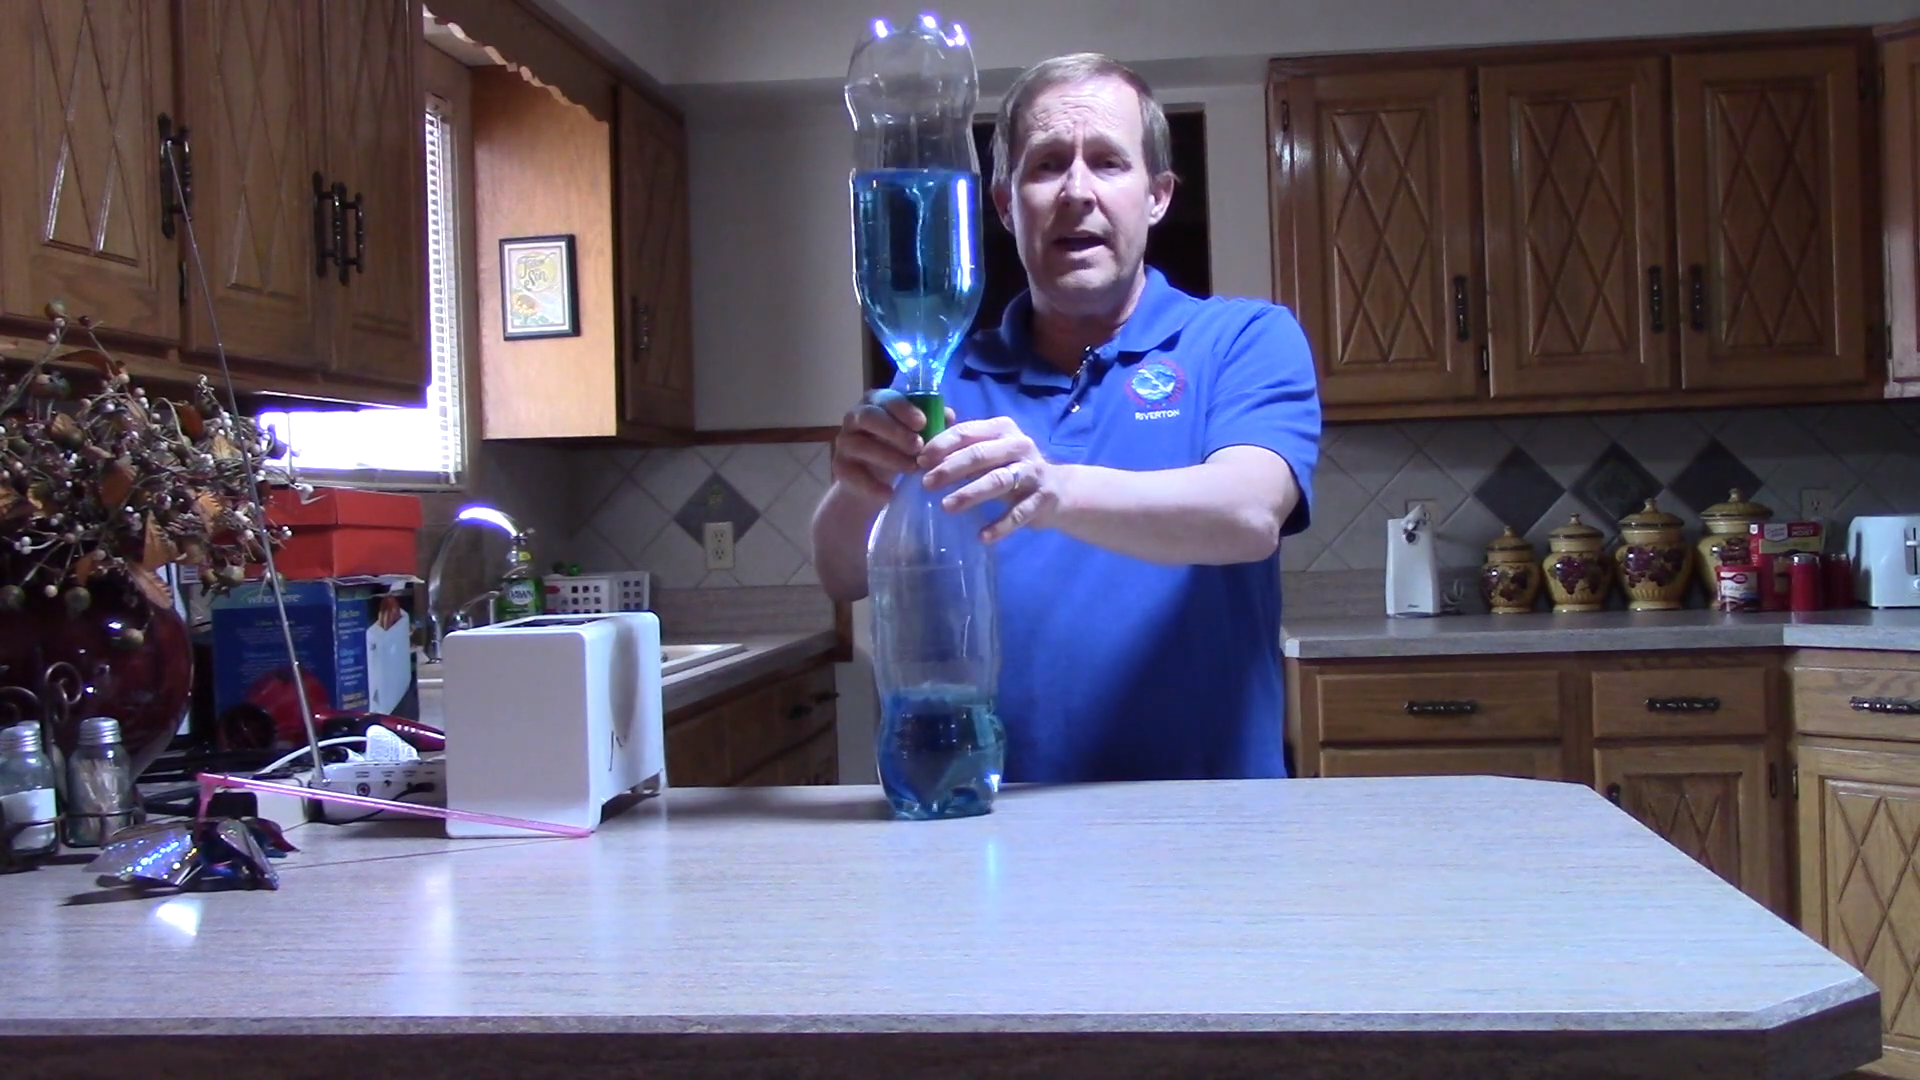  A person wearing a National Weather Service shirt and standing in a home kitchen holds two plastic 1-liter bottles that are stacked on top of each other vertically, connected at the neck, and partially filled with colored liquid. A funnel shape, like that of a tornado, forms in the liquid in the upper bottle as it flows through the narrow neck and into the lower bottle. 